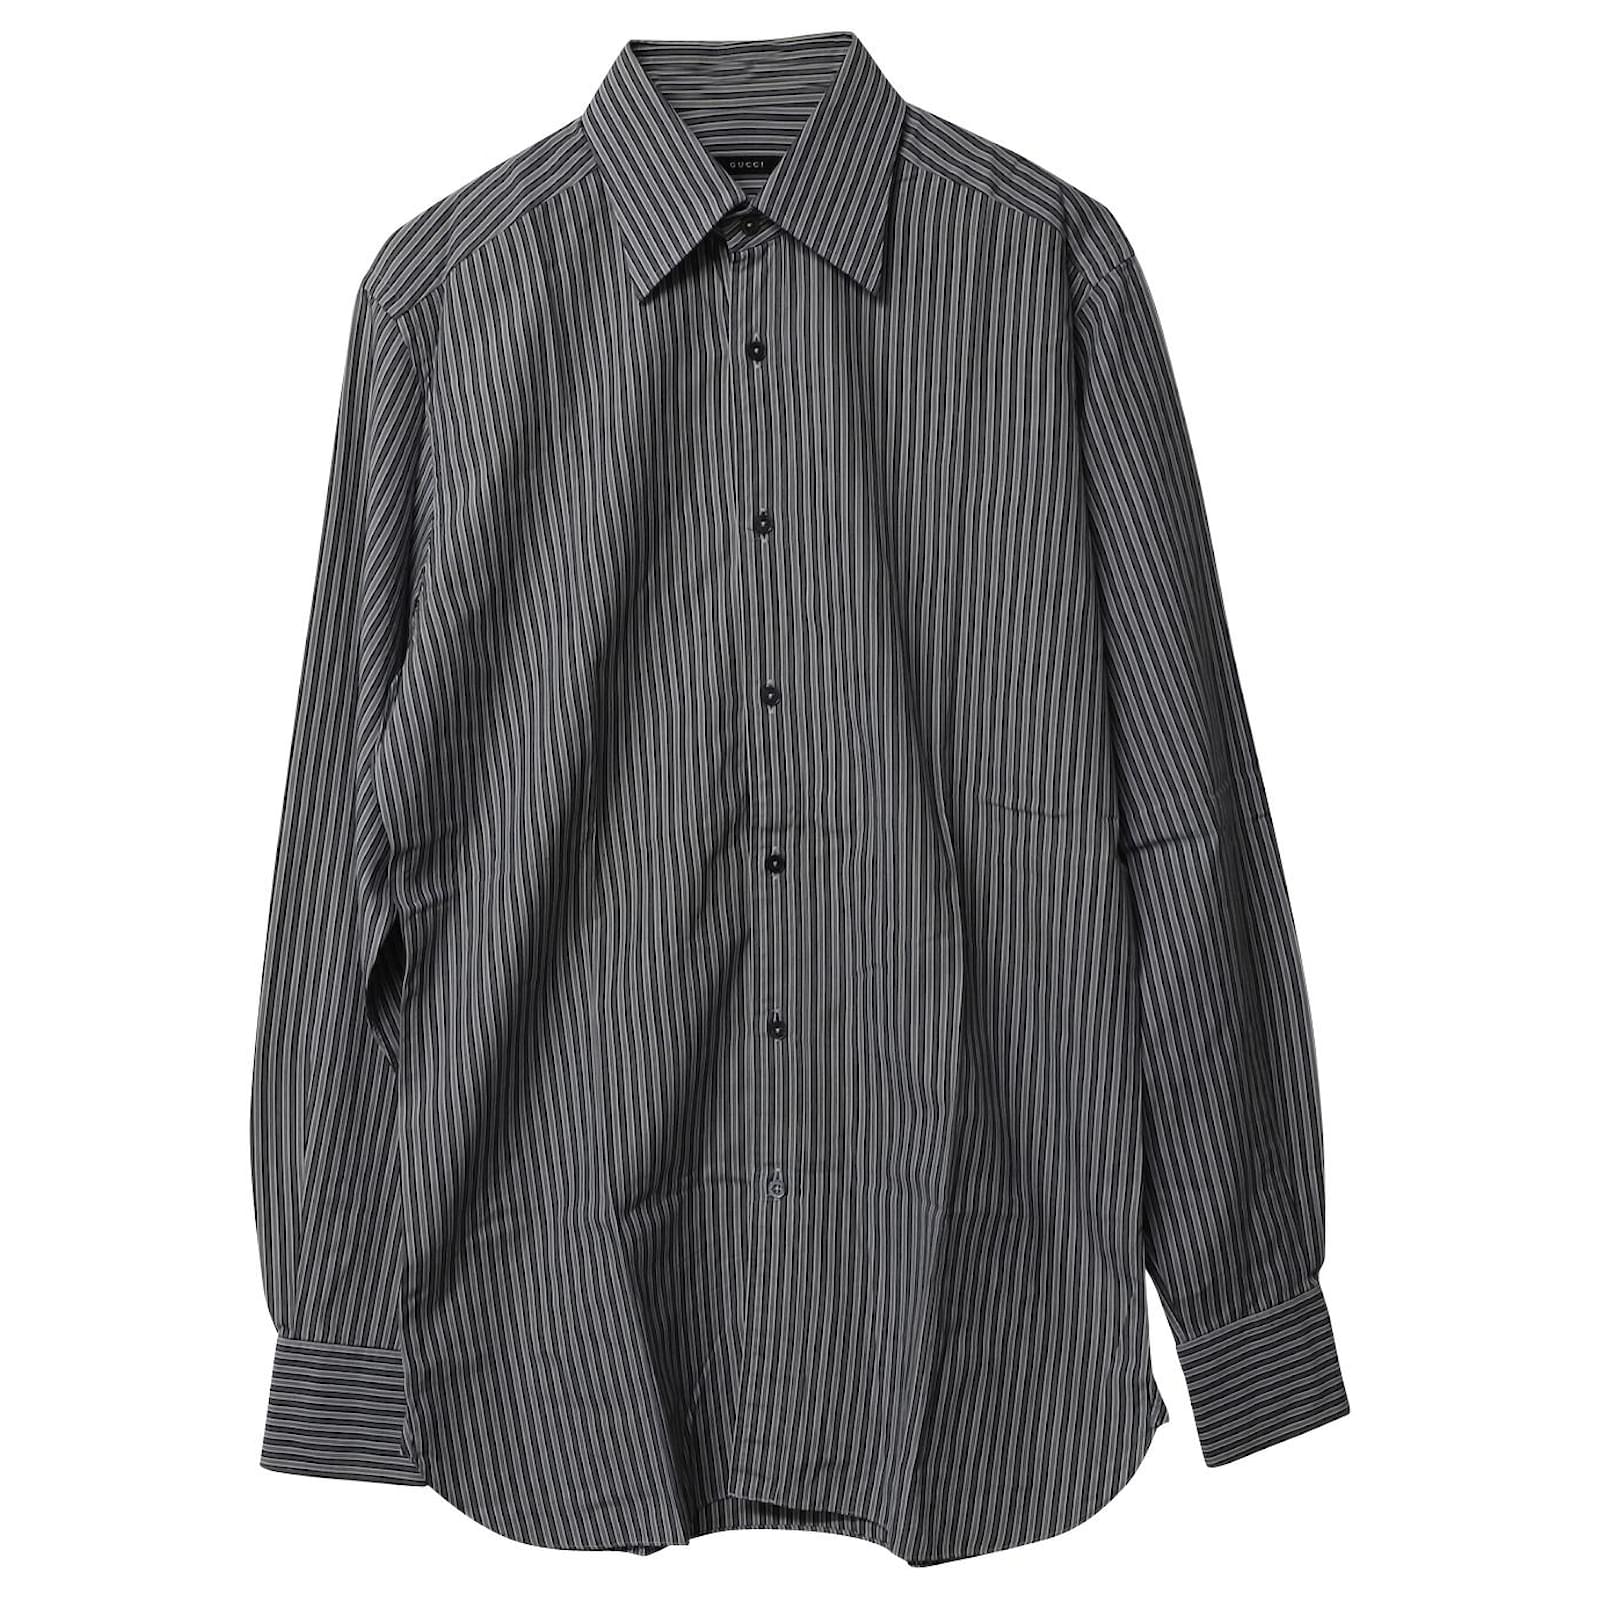 Gucci Button Down Shirt in Black for Men